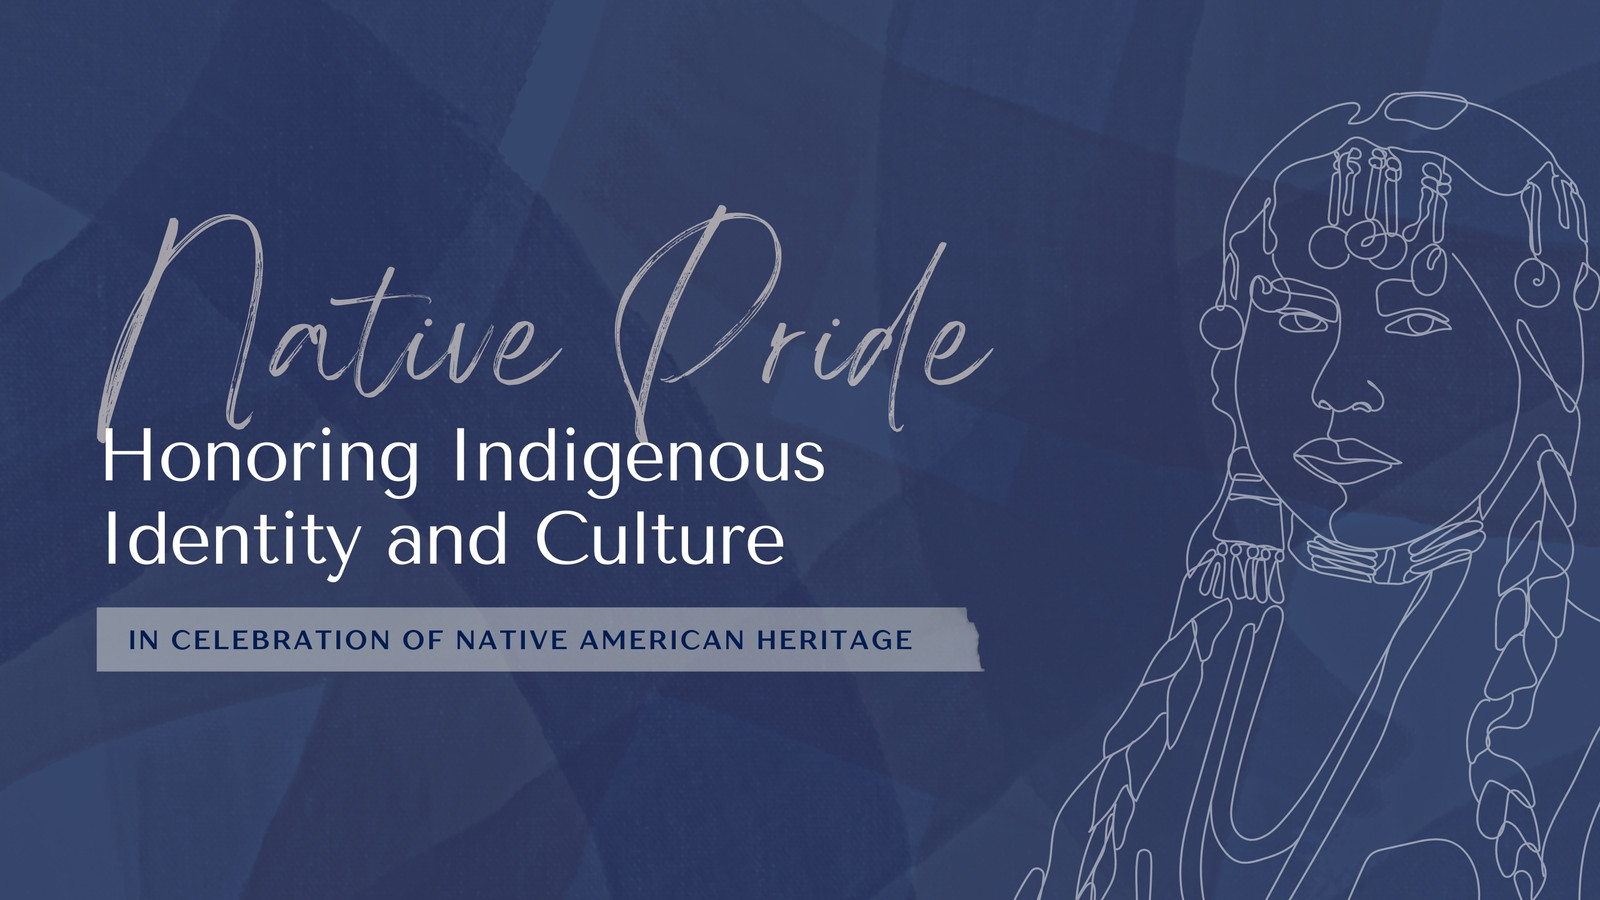 Native American Heritage Month Videos Available Online and in